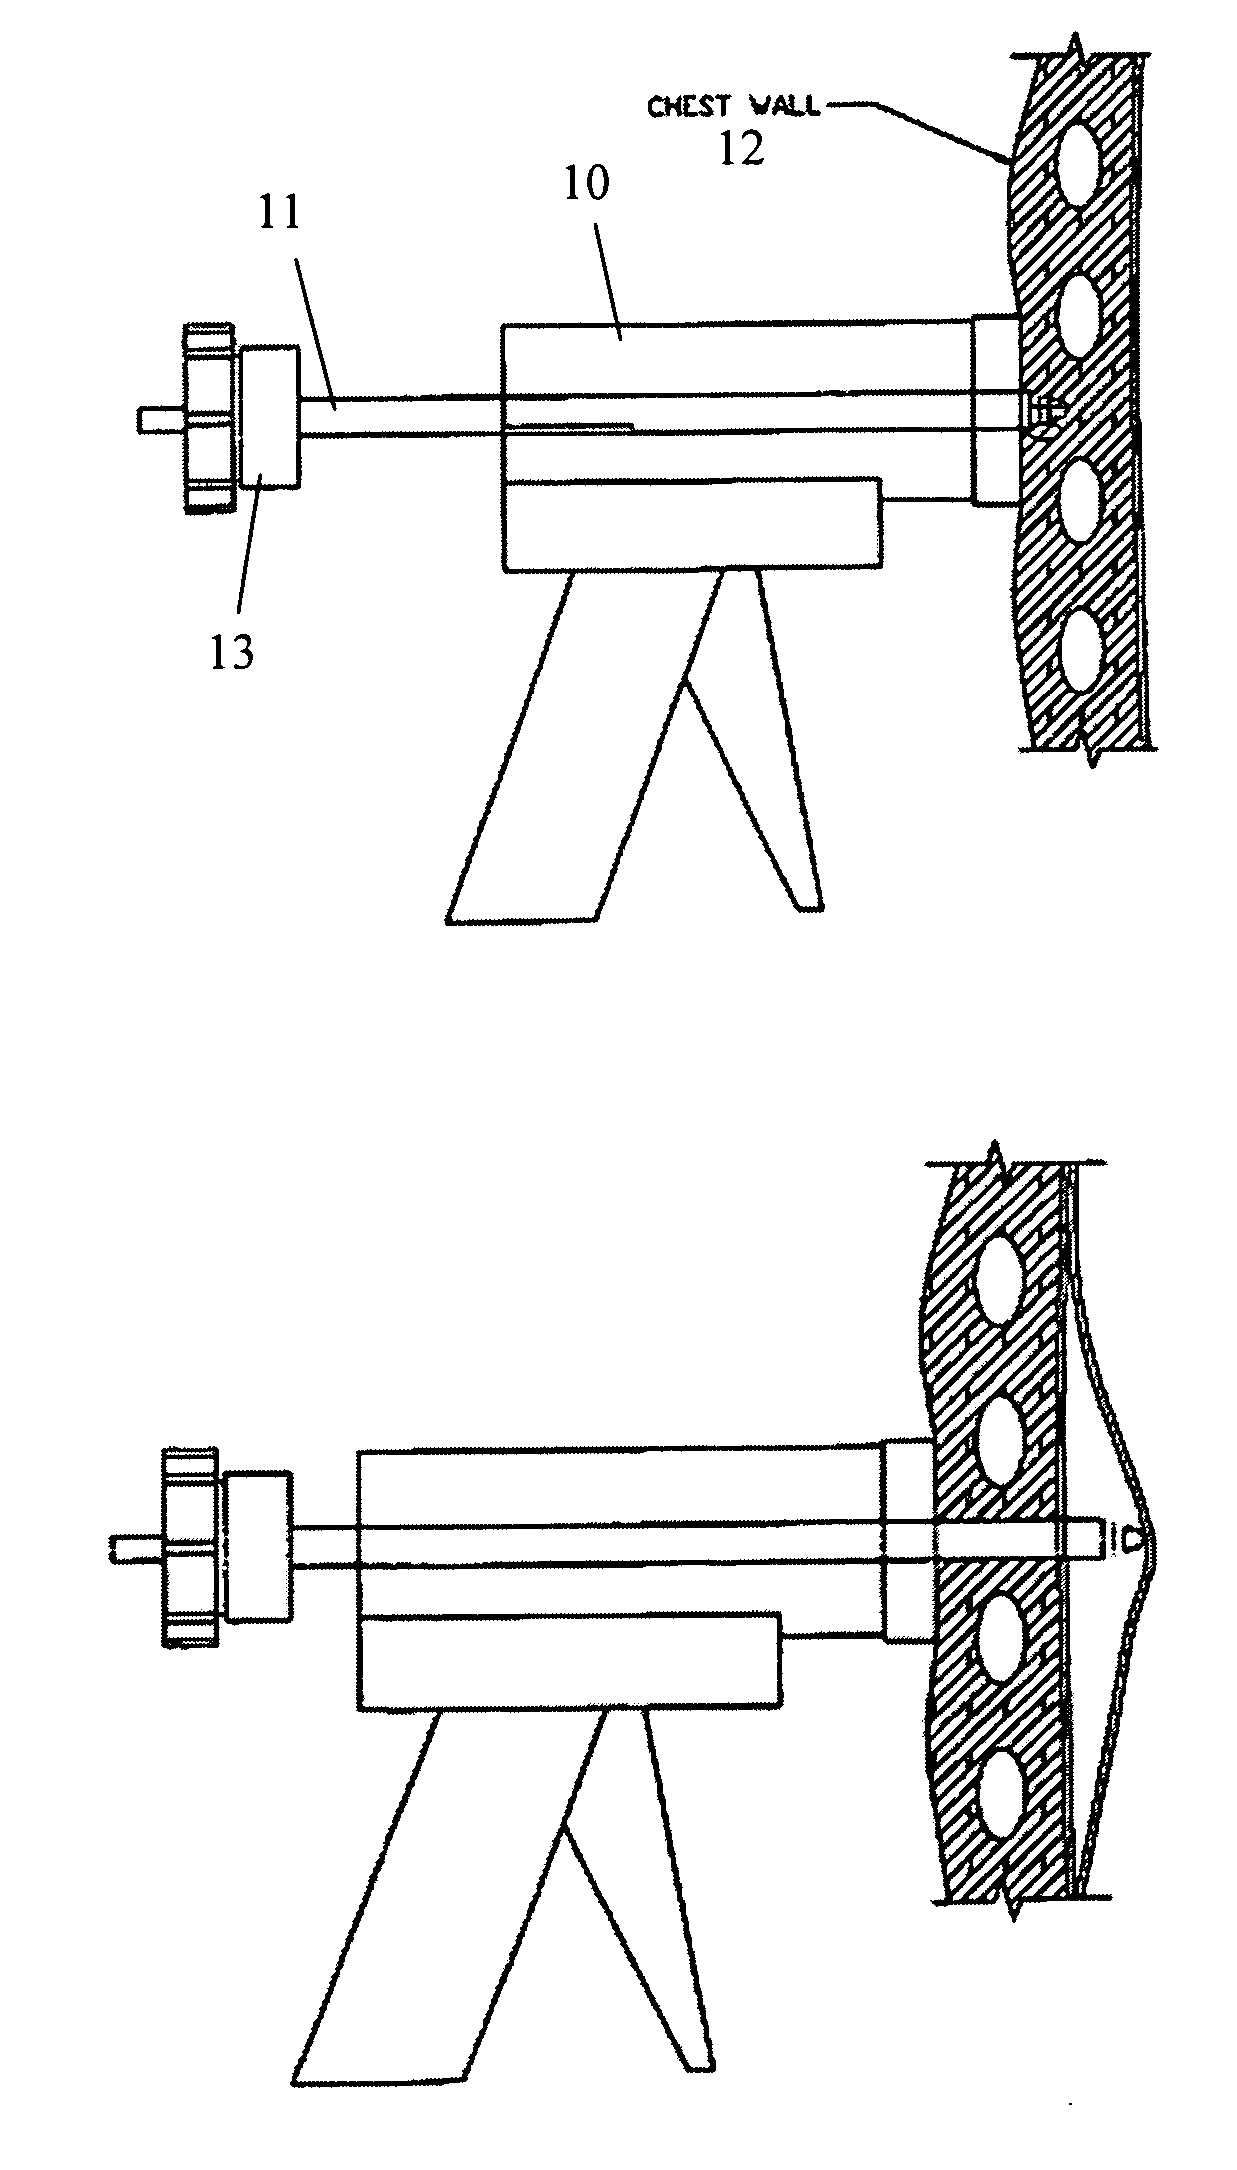 Apparatus and methods for safe and efficient placement of chest tubes